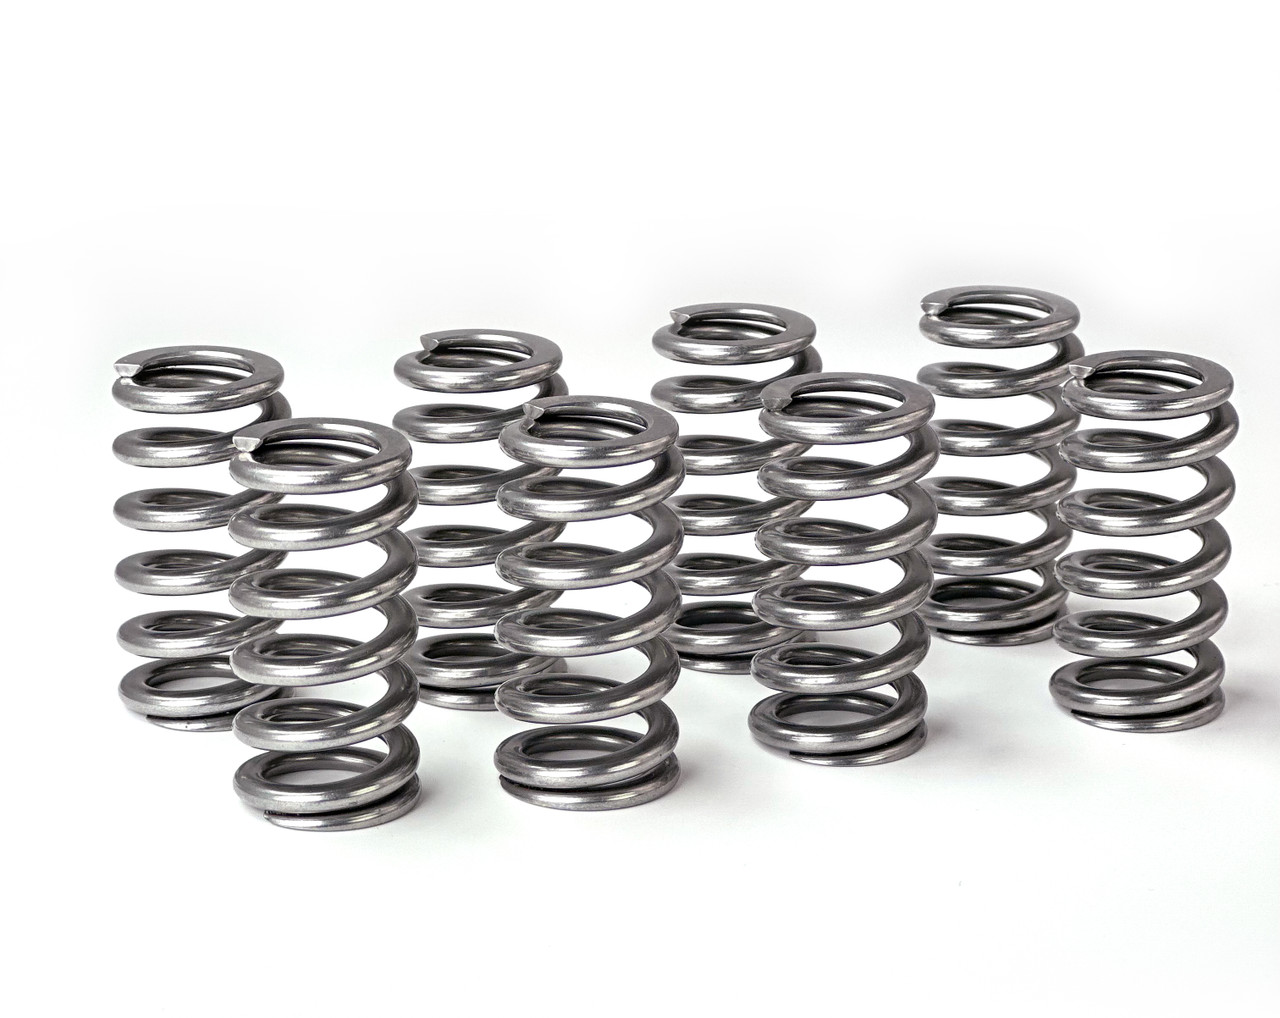 Supertech/Apocalypse 2V valve springs for stock retainers (drop-in)